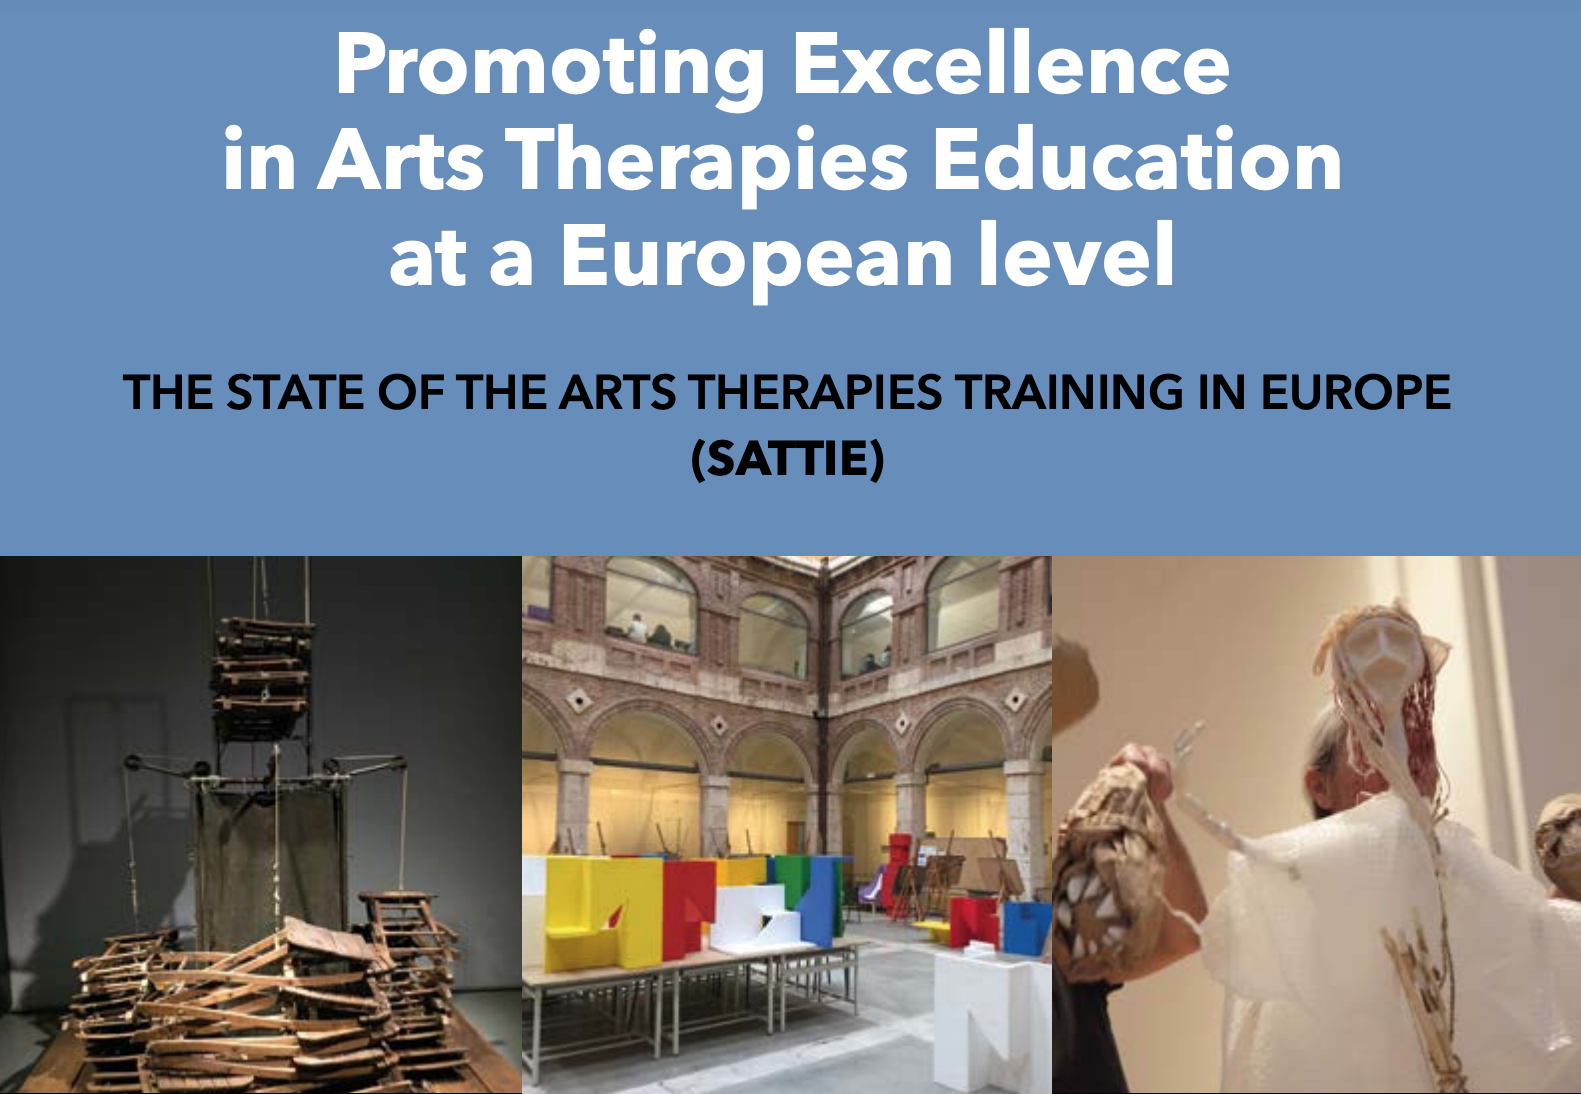 Report of the State of Arts Therapies Training in Europe (SATTIE). First phase.